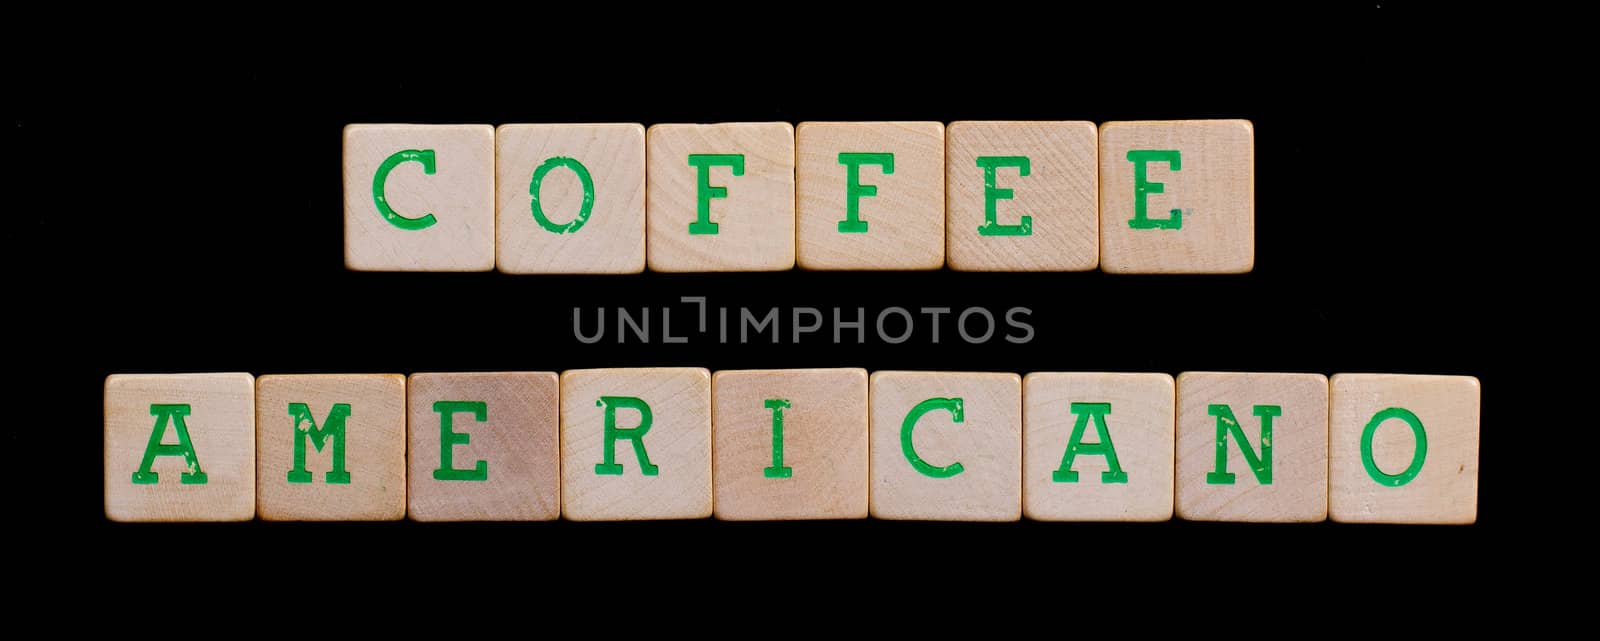 Green letters on old wooden blocks (coffee, americano) by michaklootwijk